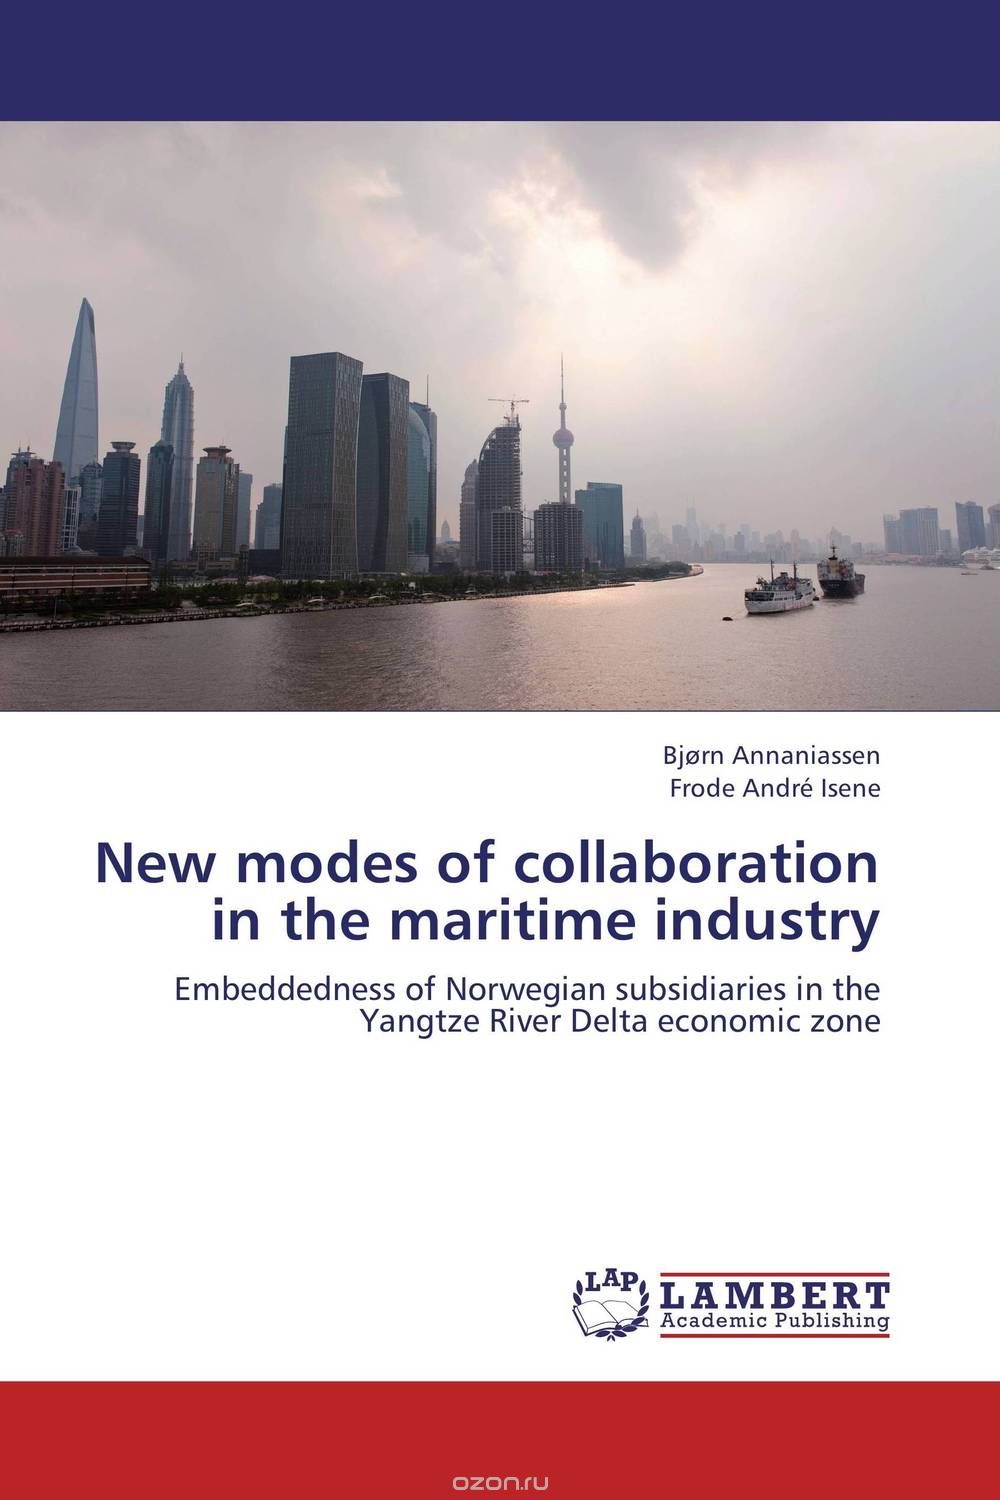 Скачать книгу "New modes of collaboration in the maritime industry"